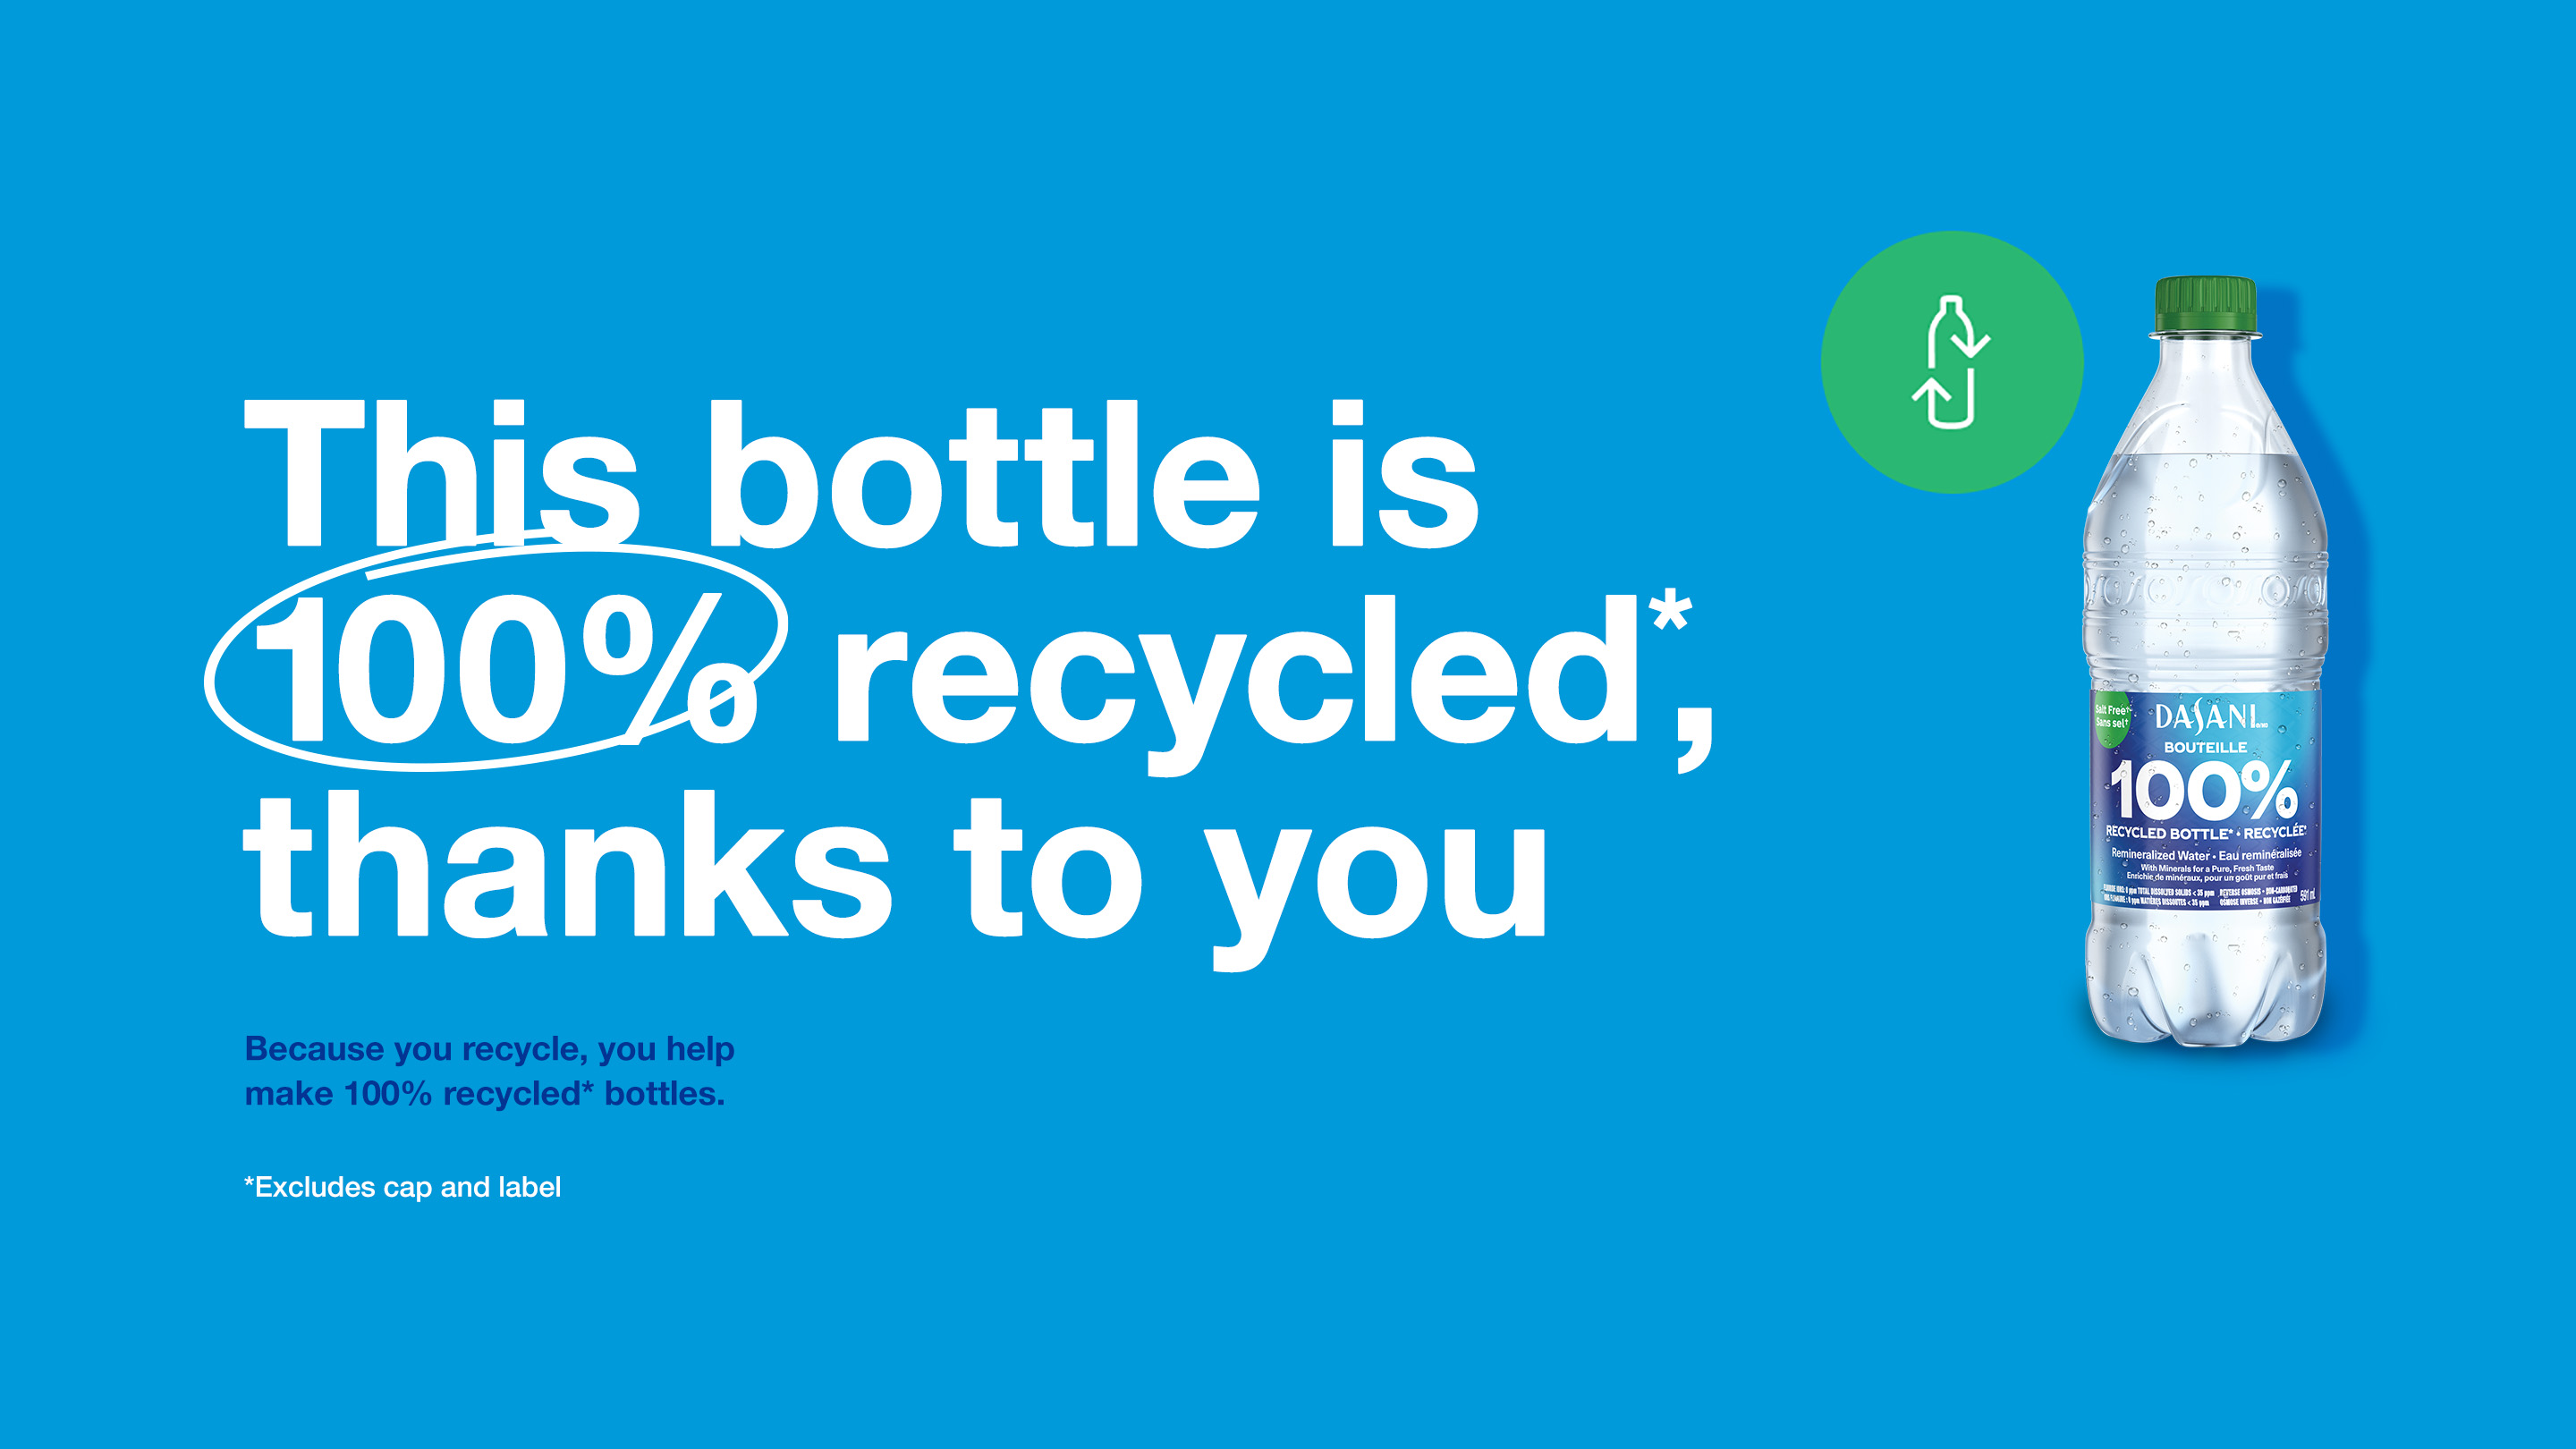 DASANI. This bottle is 100% recycled*, thanks to you. Because you recycle, you help make 100% recycled* bottles. *Excludes cap and label.